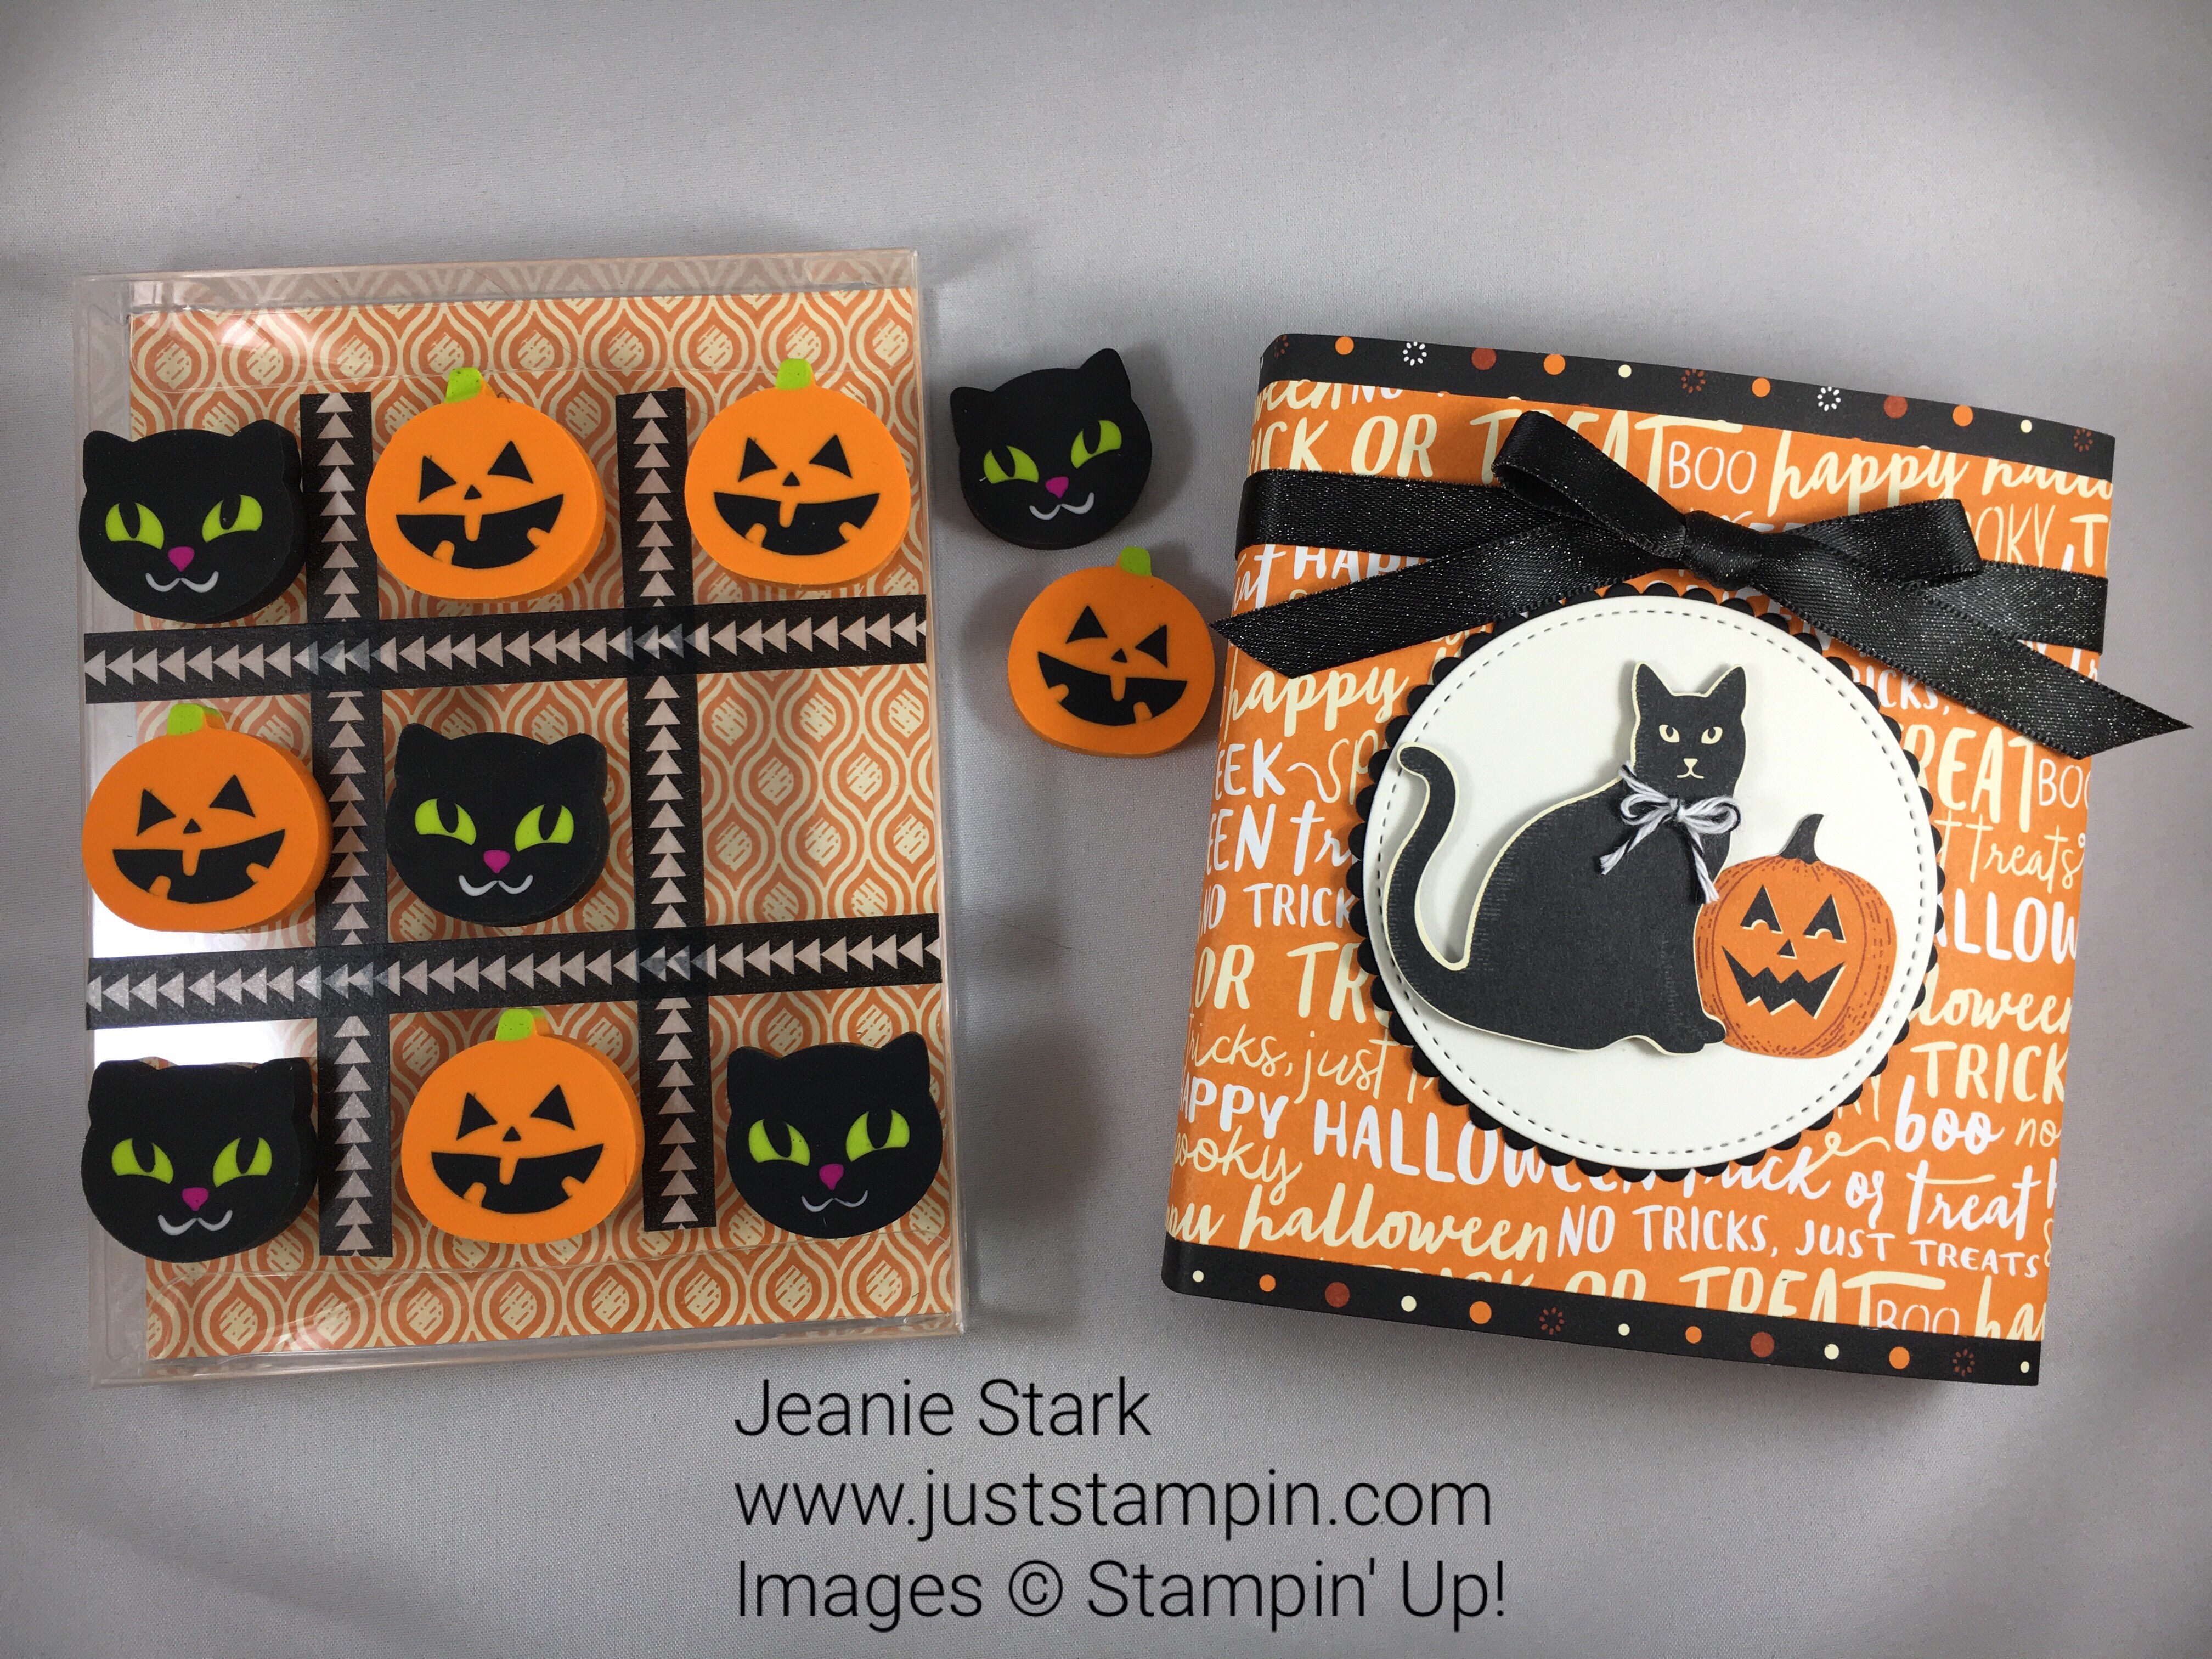 Stampin Up Spooky Night gift idea using Clear Acetate box, Pick a Pattern Washi Tape, and Spooky Night Designer Series Paper - Jeanie Stark StampinUp